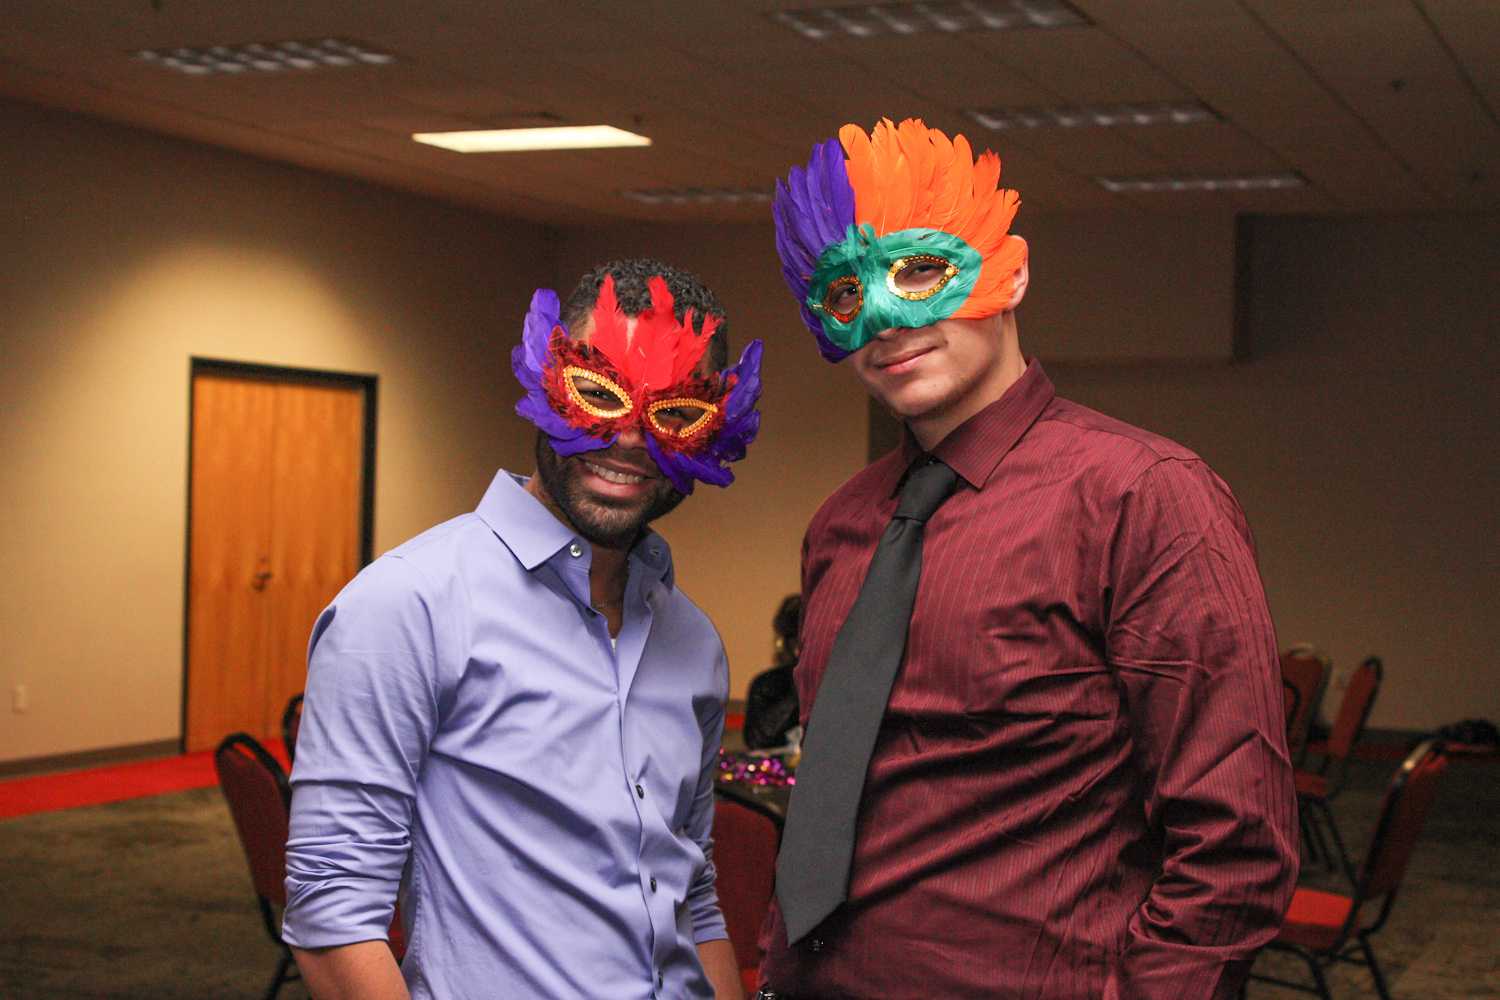 Donning colorful masquerade masks, Milor Perdomo, a junior political science major, and Ricardo Torres, a sophomore criminal justice major, pose for a photo at the LGBTQA Gala held on Friday Jan 30, in FAU’s Boca Student Union. 